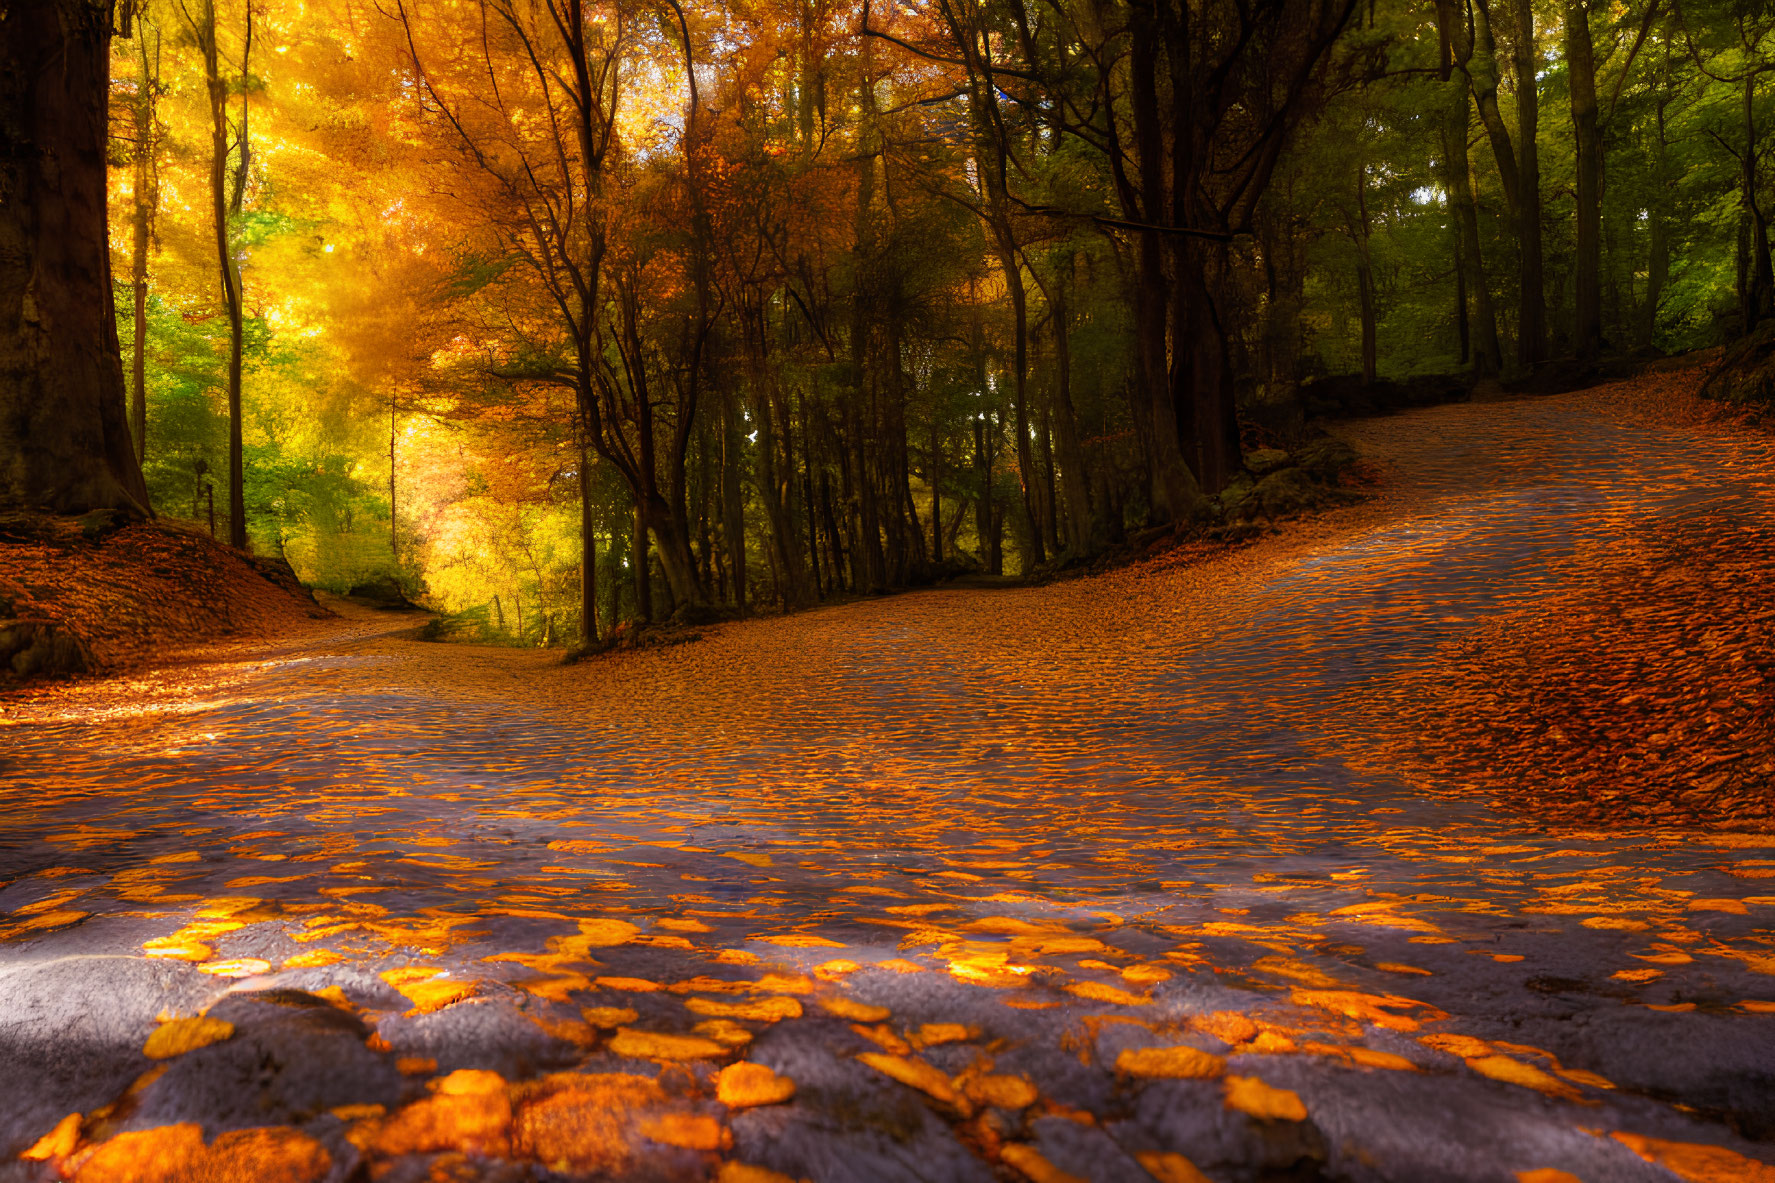 Tranquil autumn forest pathway with fallen leaves and golden sunlight